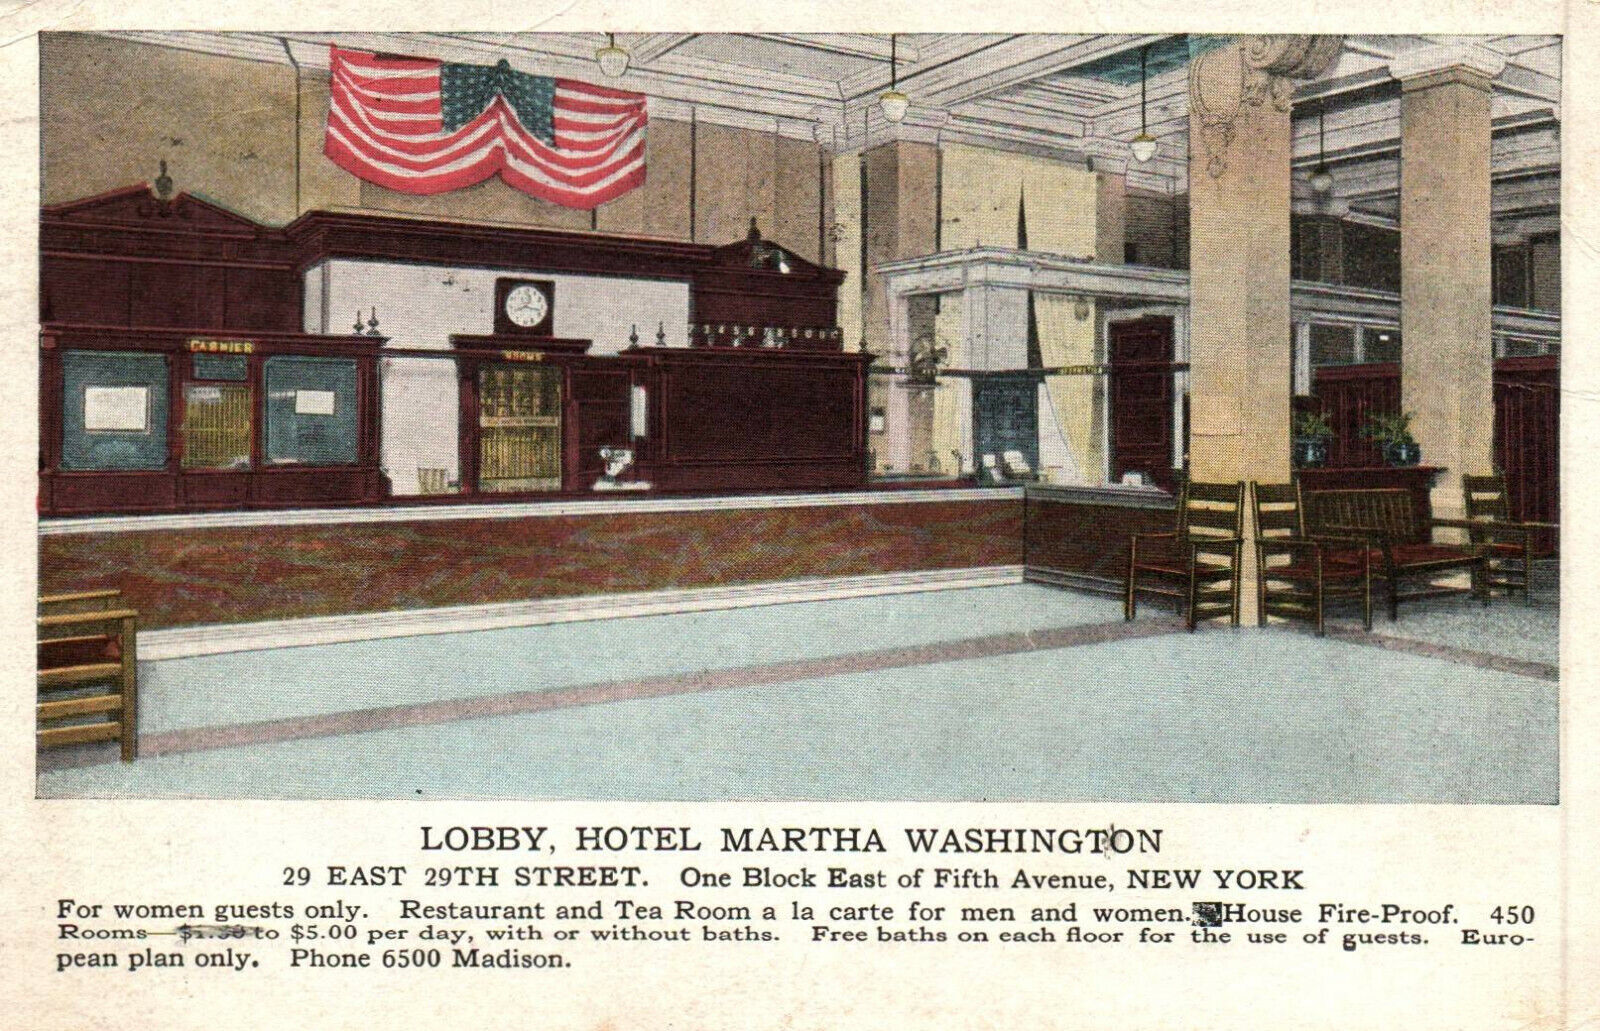 CPA - USA - NEW YORK - Lobby Hotel Martha Washington - For Women guests only